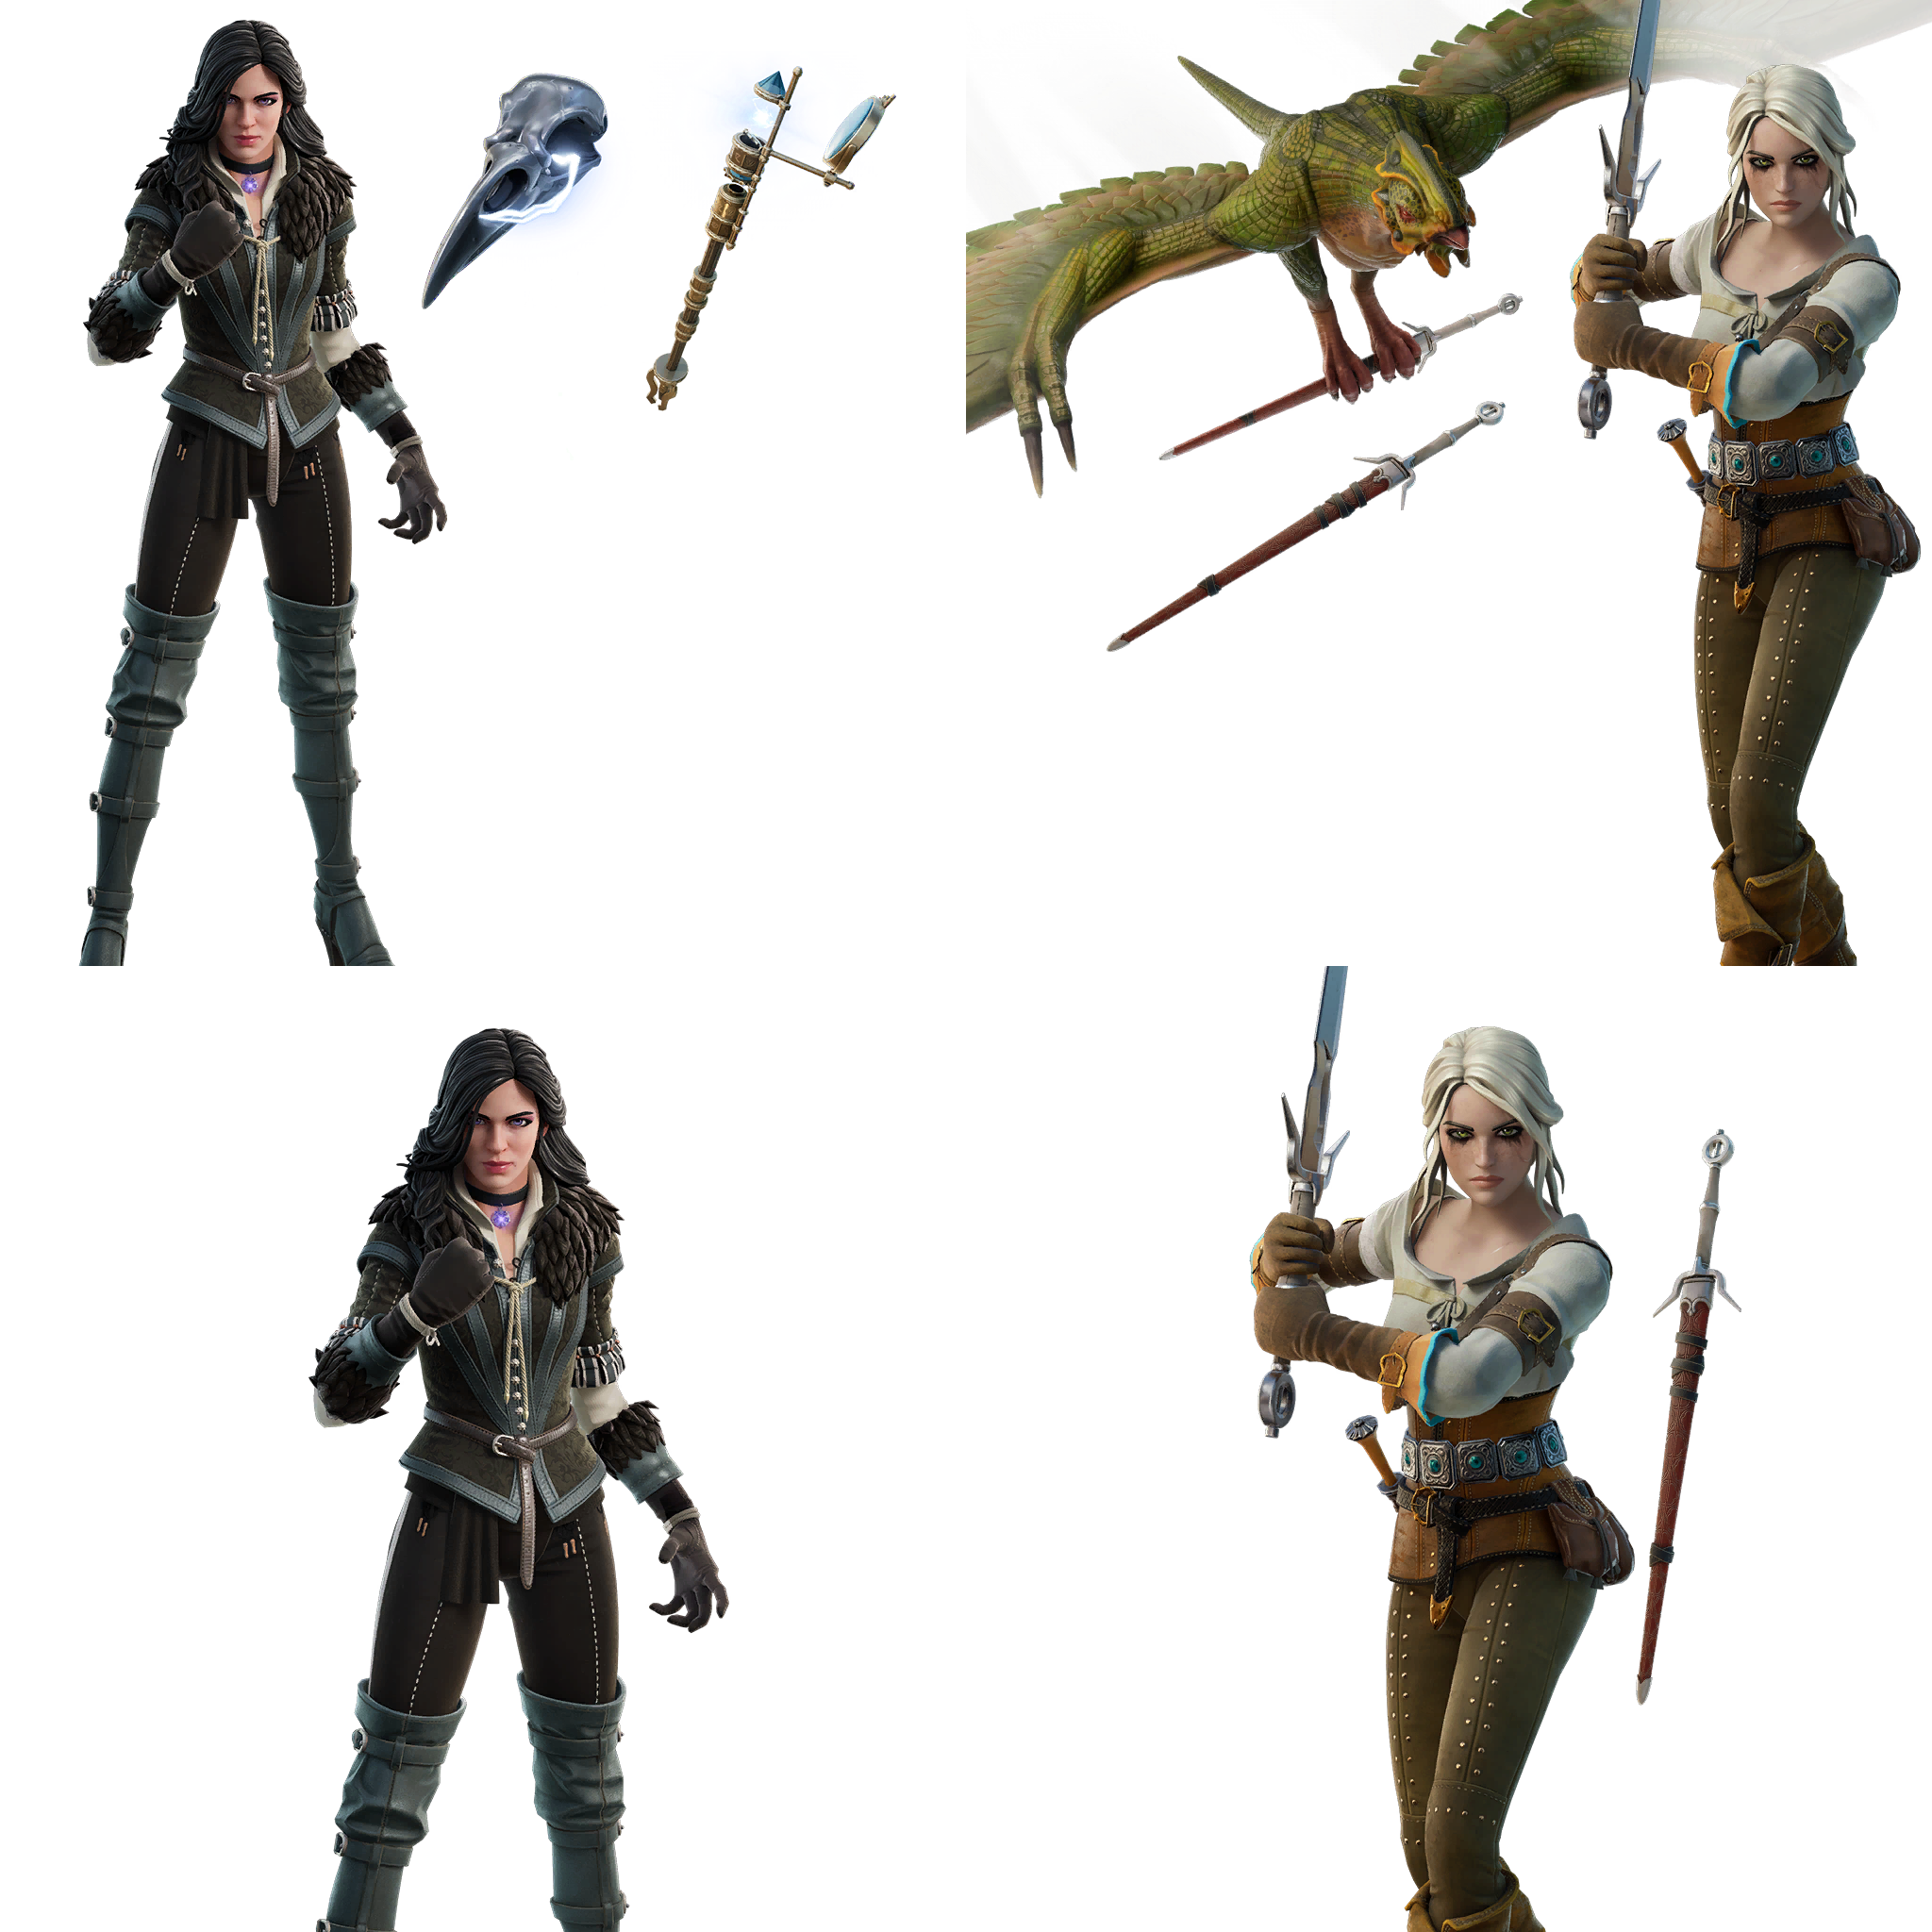 Follow Your Destiny with Ciri and Yennefer of Vengerberg in Fortnite!